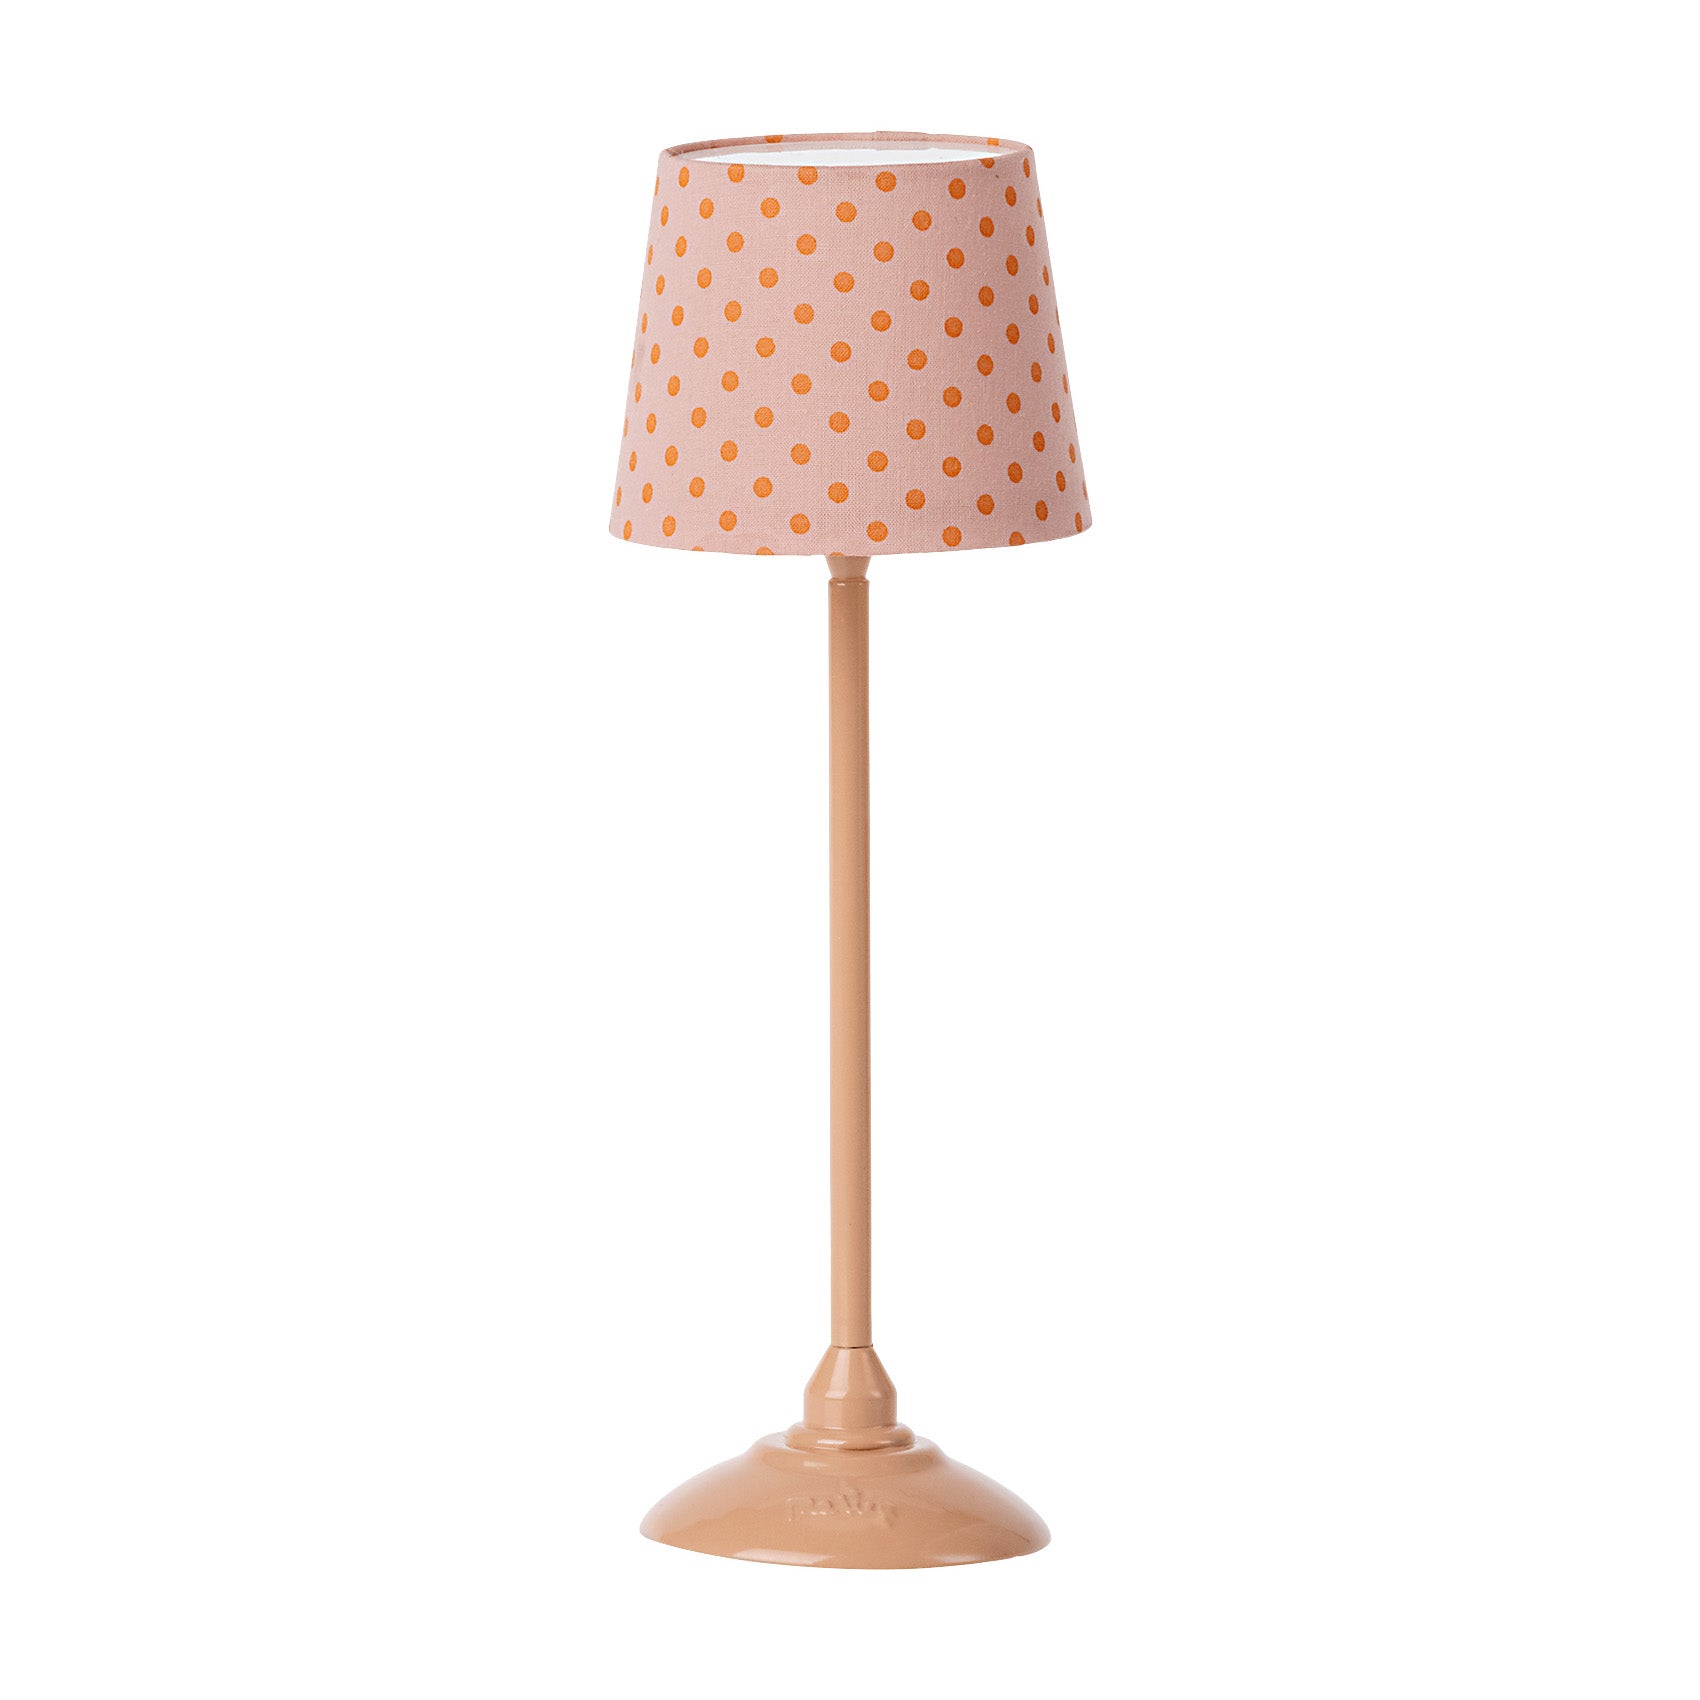 Maileg floor lamp (Available in 2 styles)